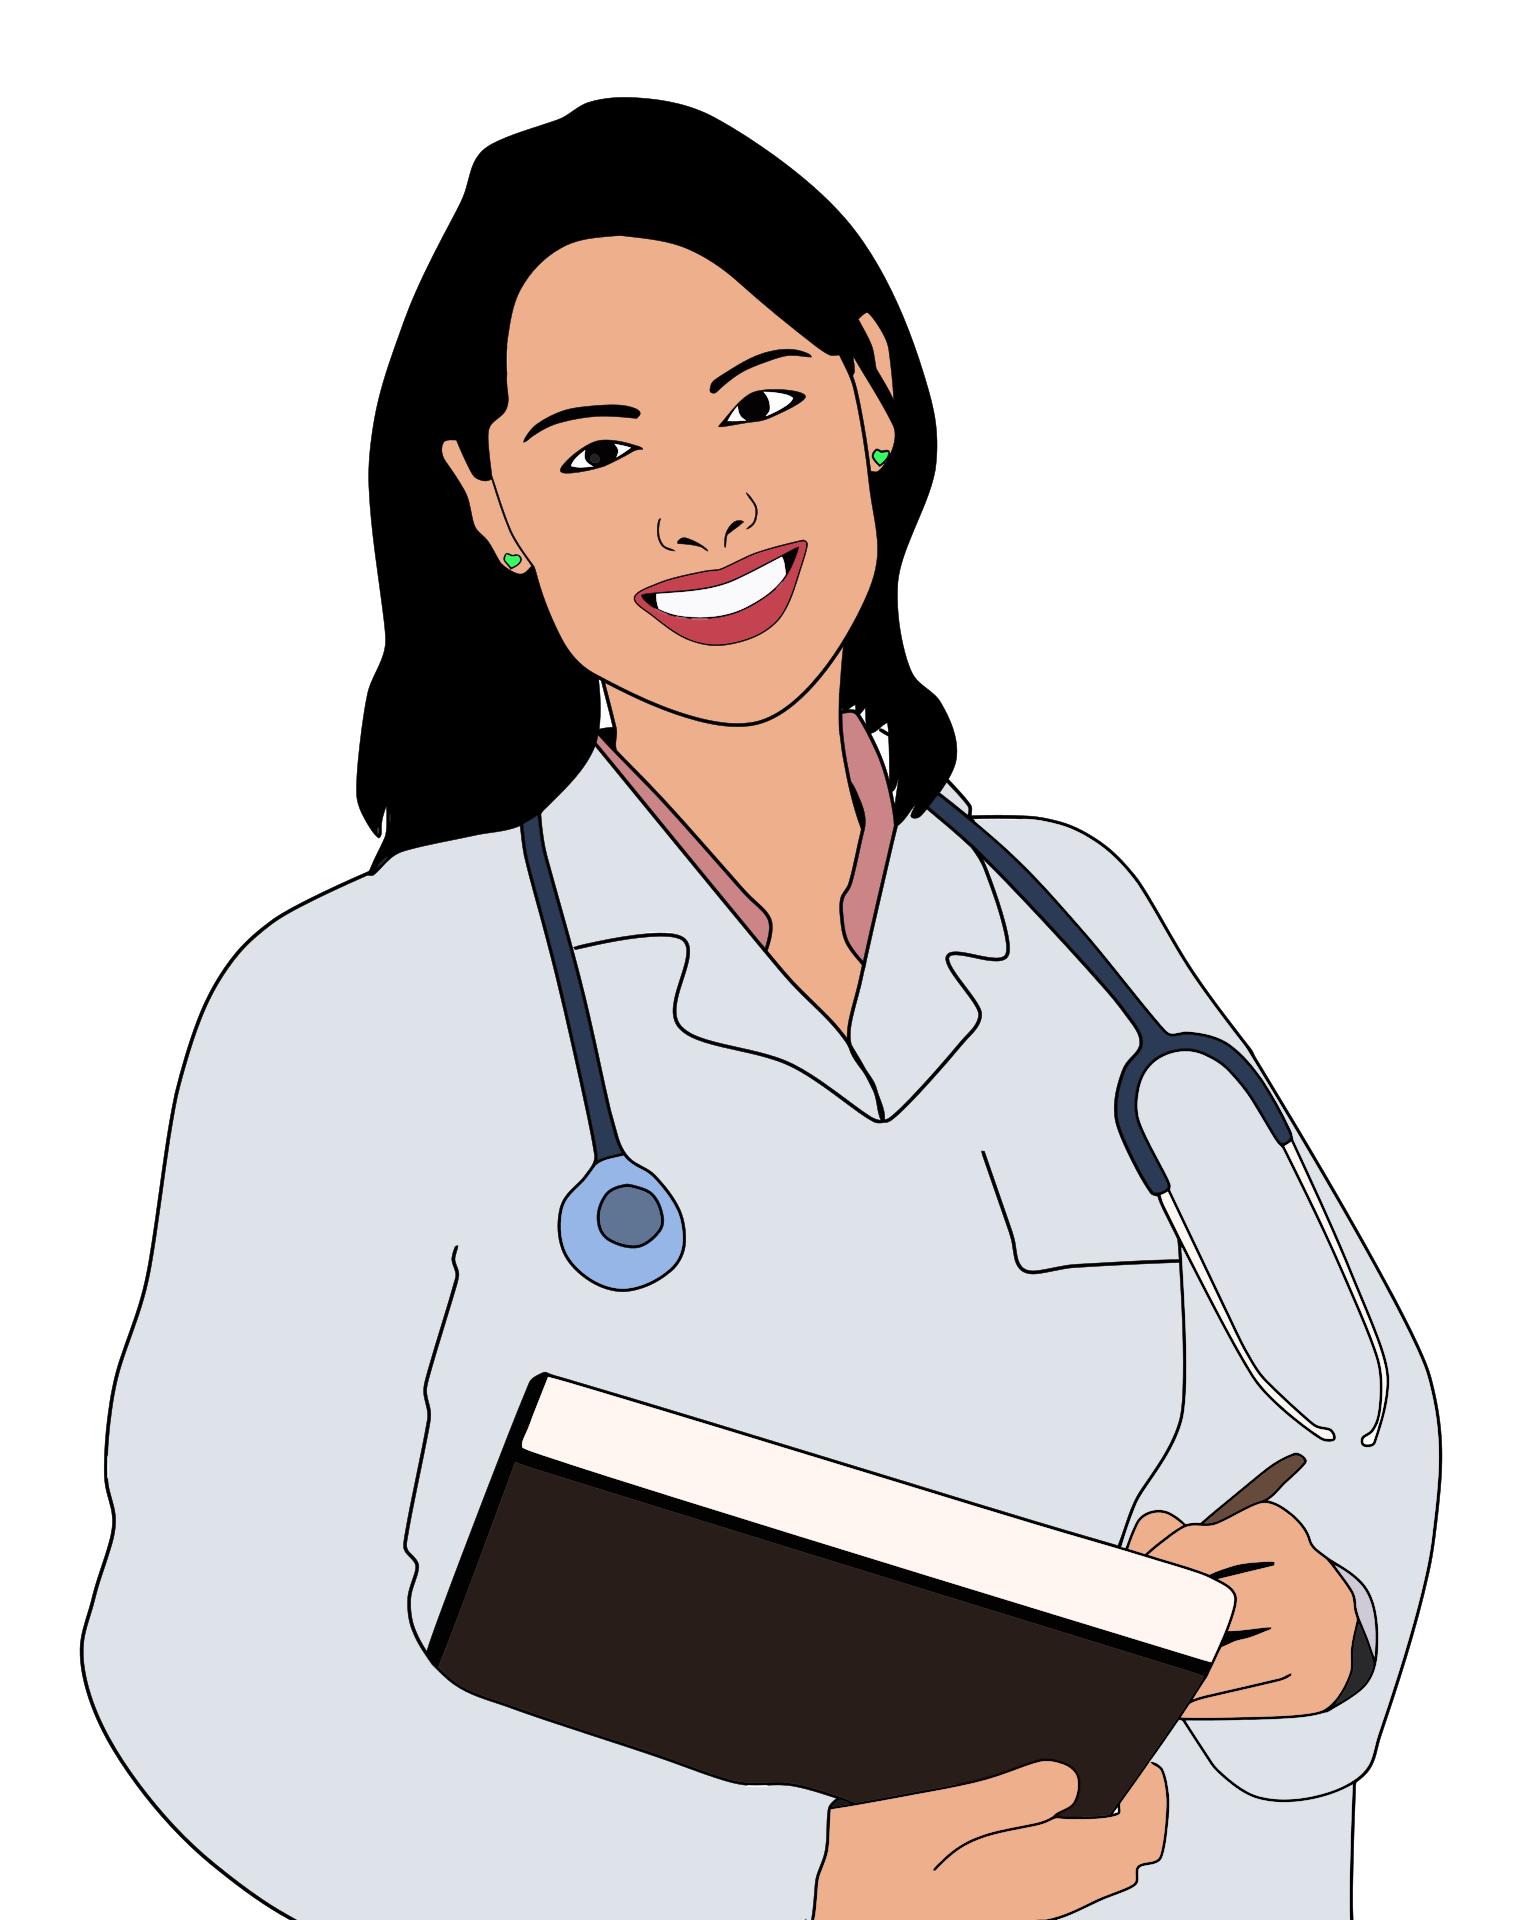 Woman doctor clipart.